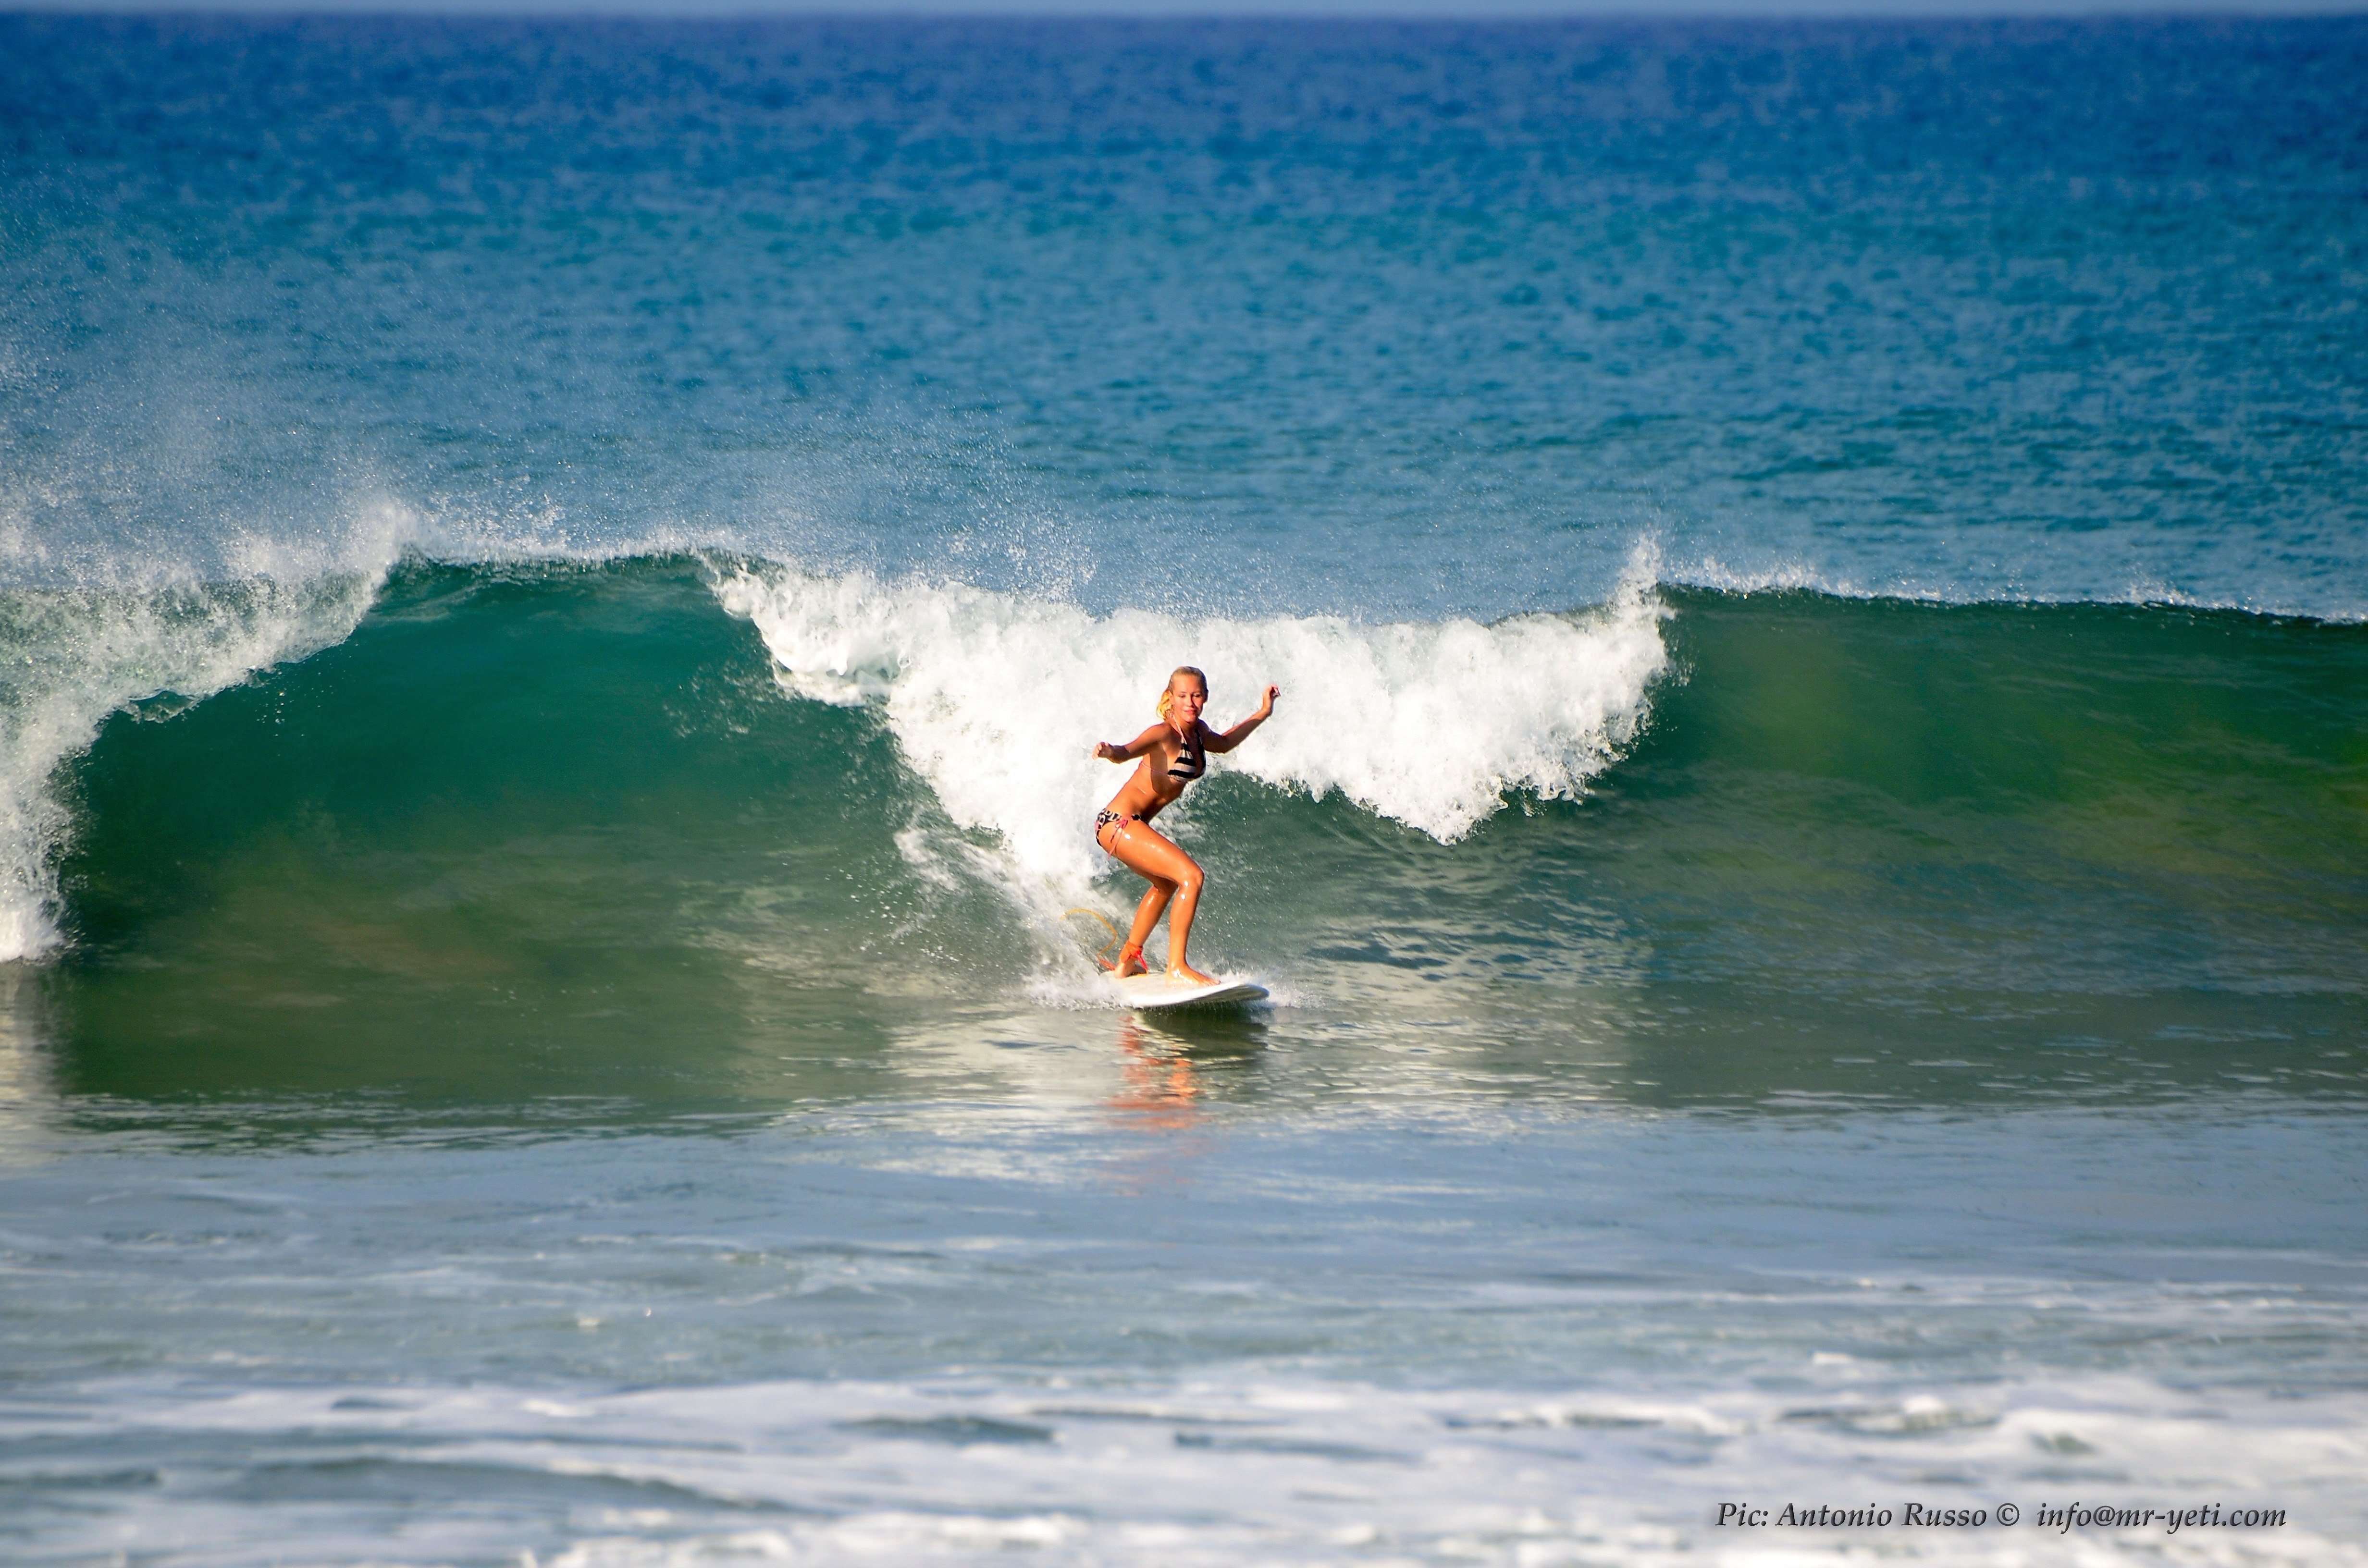 SURF DIARIES: Daily Entries of a Surfer Girl | Theresa Longo